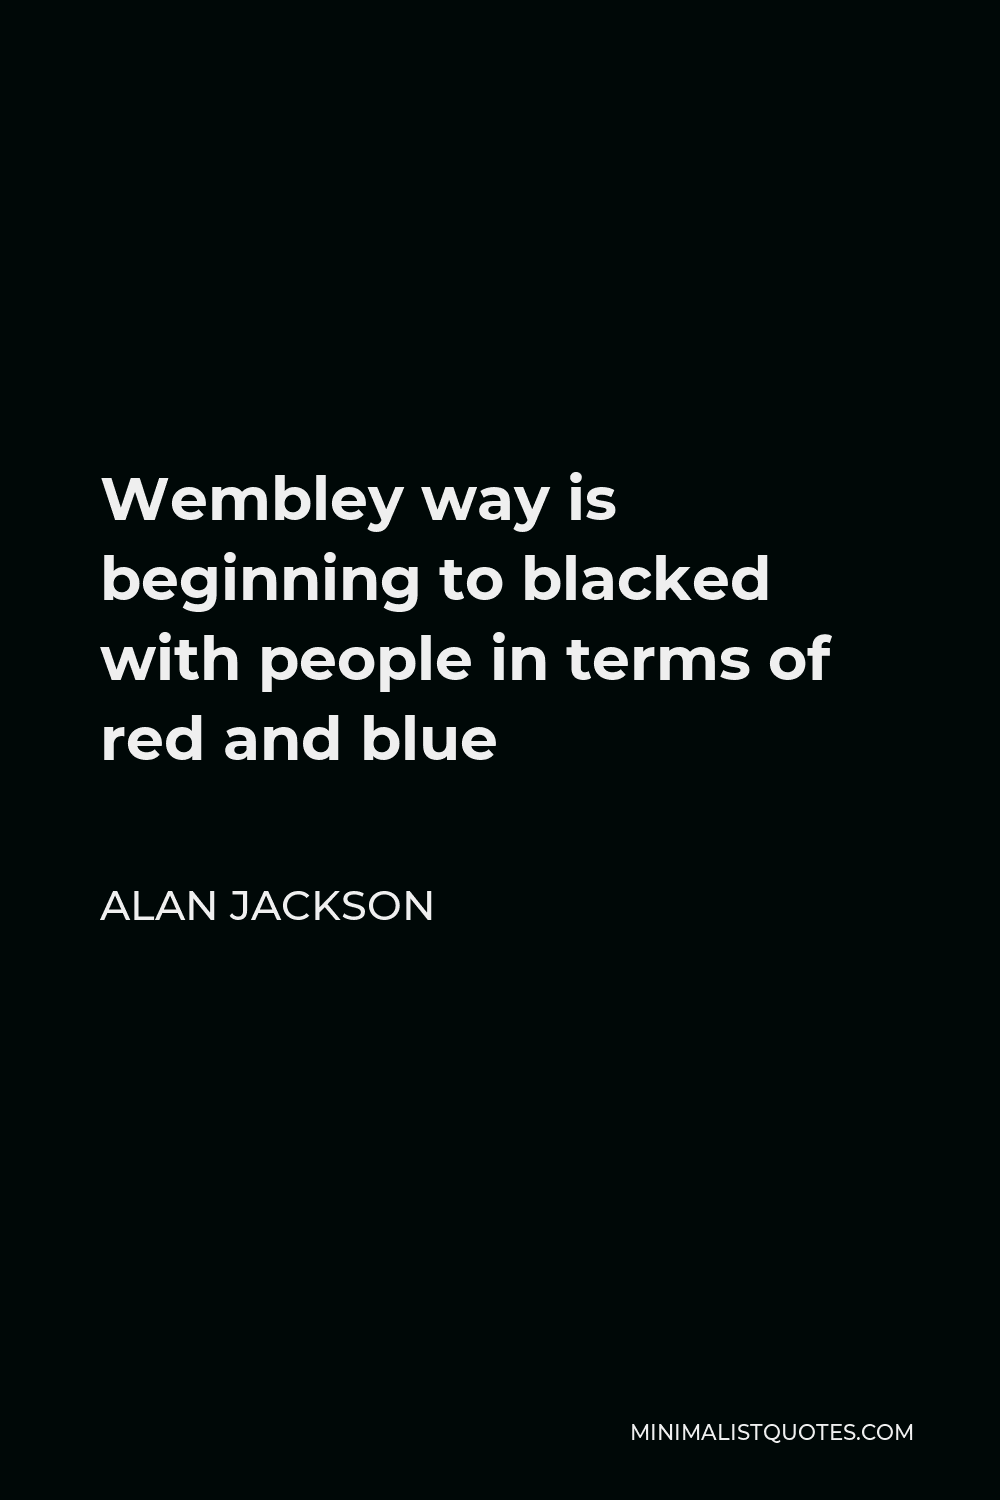 Alan Jackson Quote - Wembley way is beginning to blacked with people in terms of red and blue